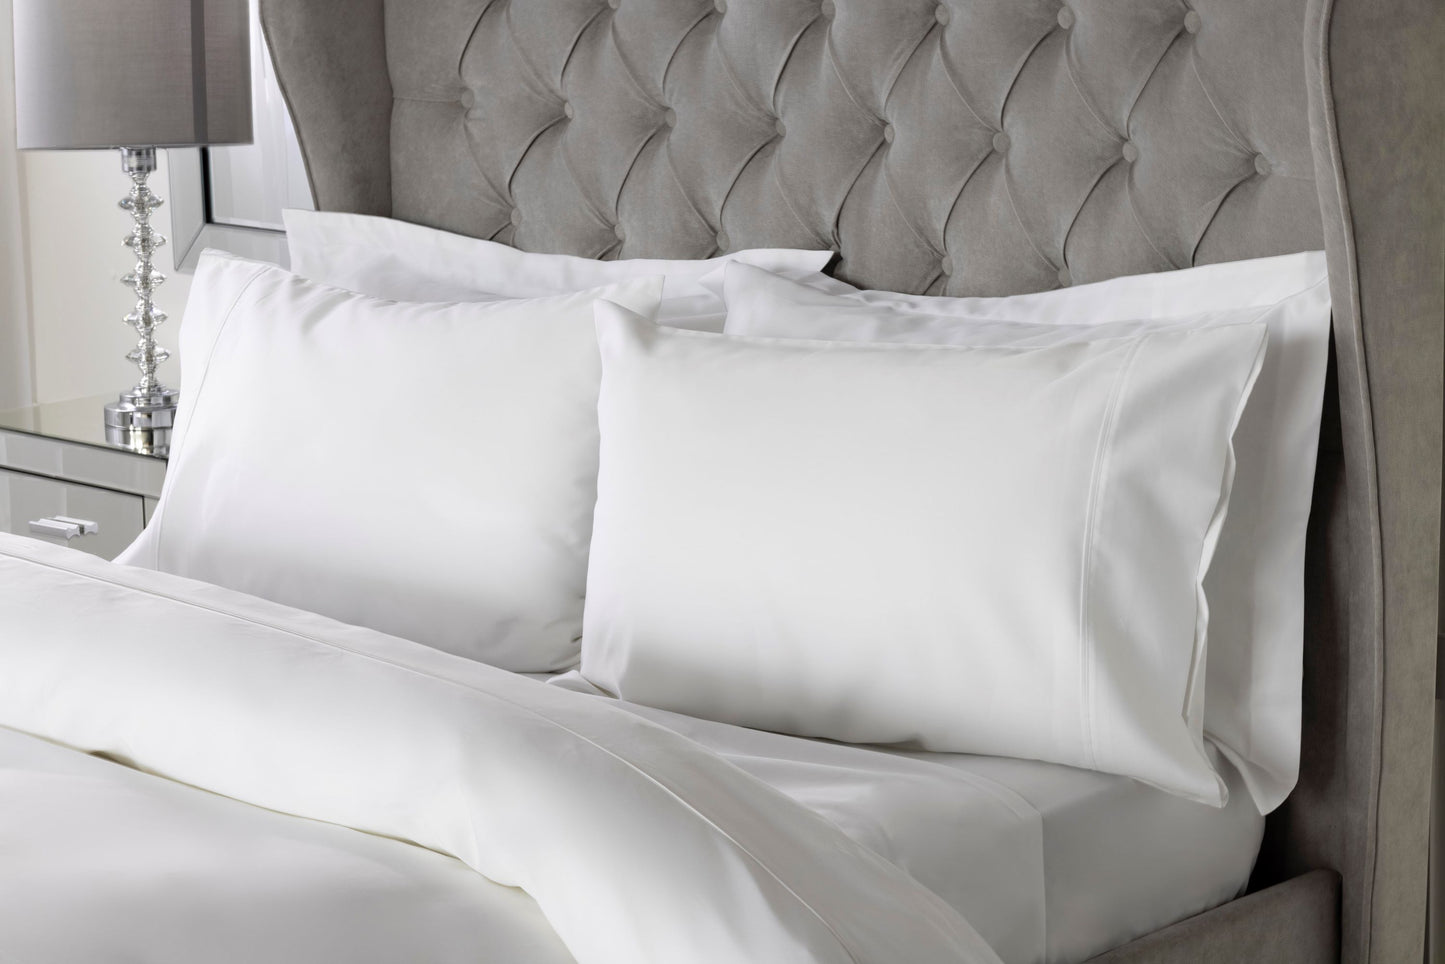 Bamboo Bed Linen in White